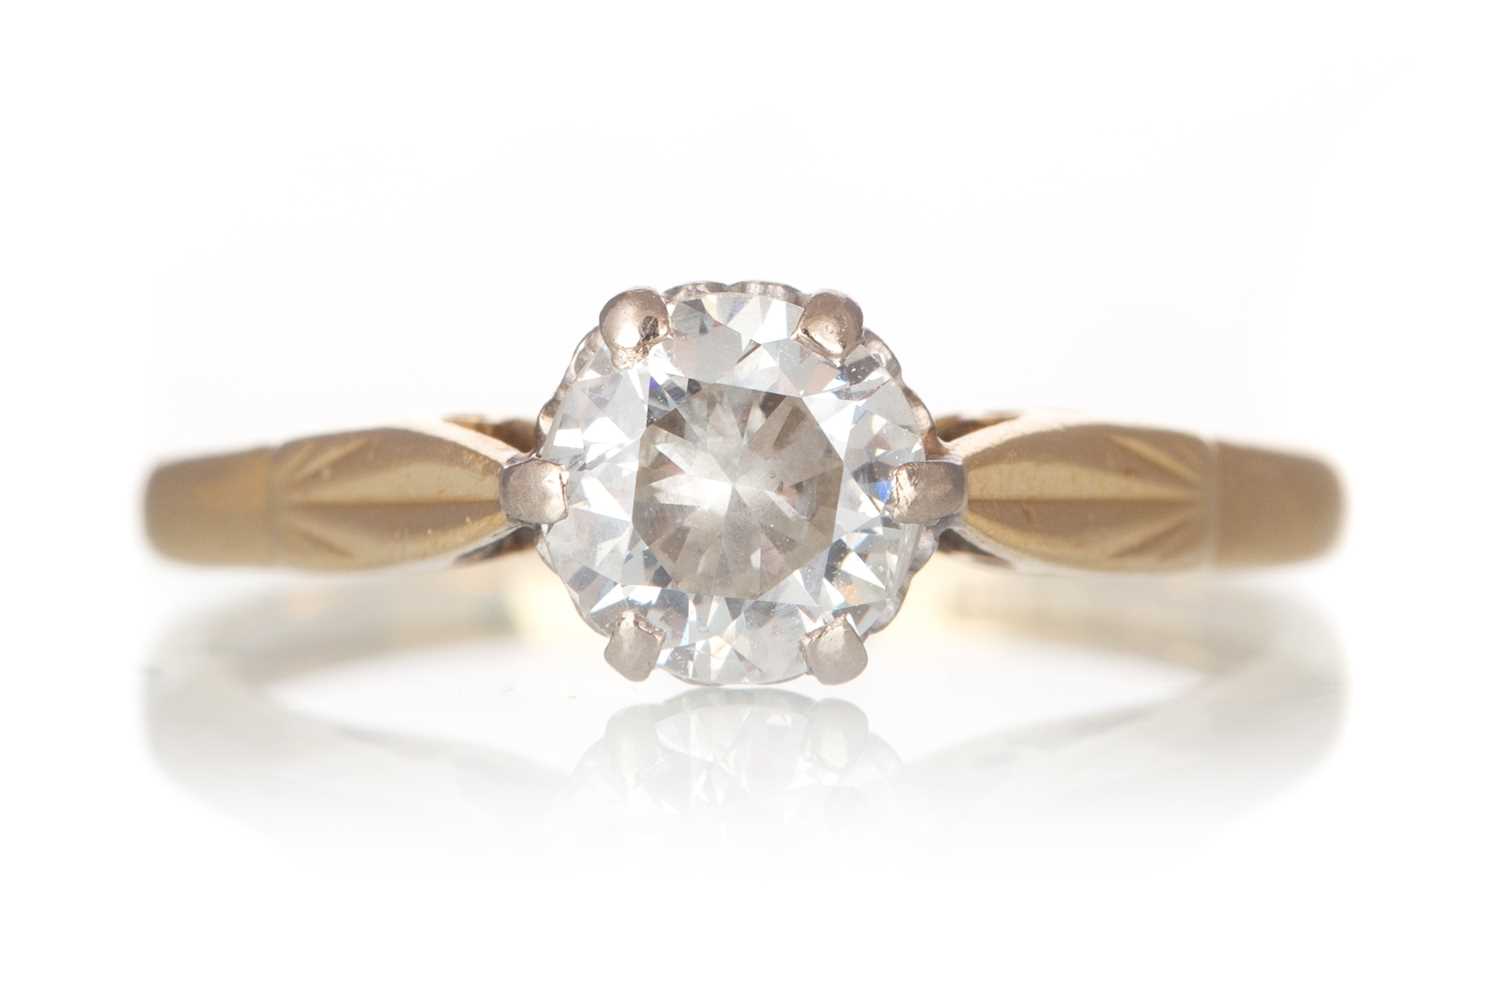 Lot 744 - DIAMOND SOLITAIRE RING